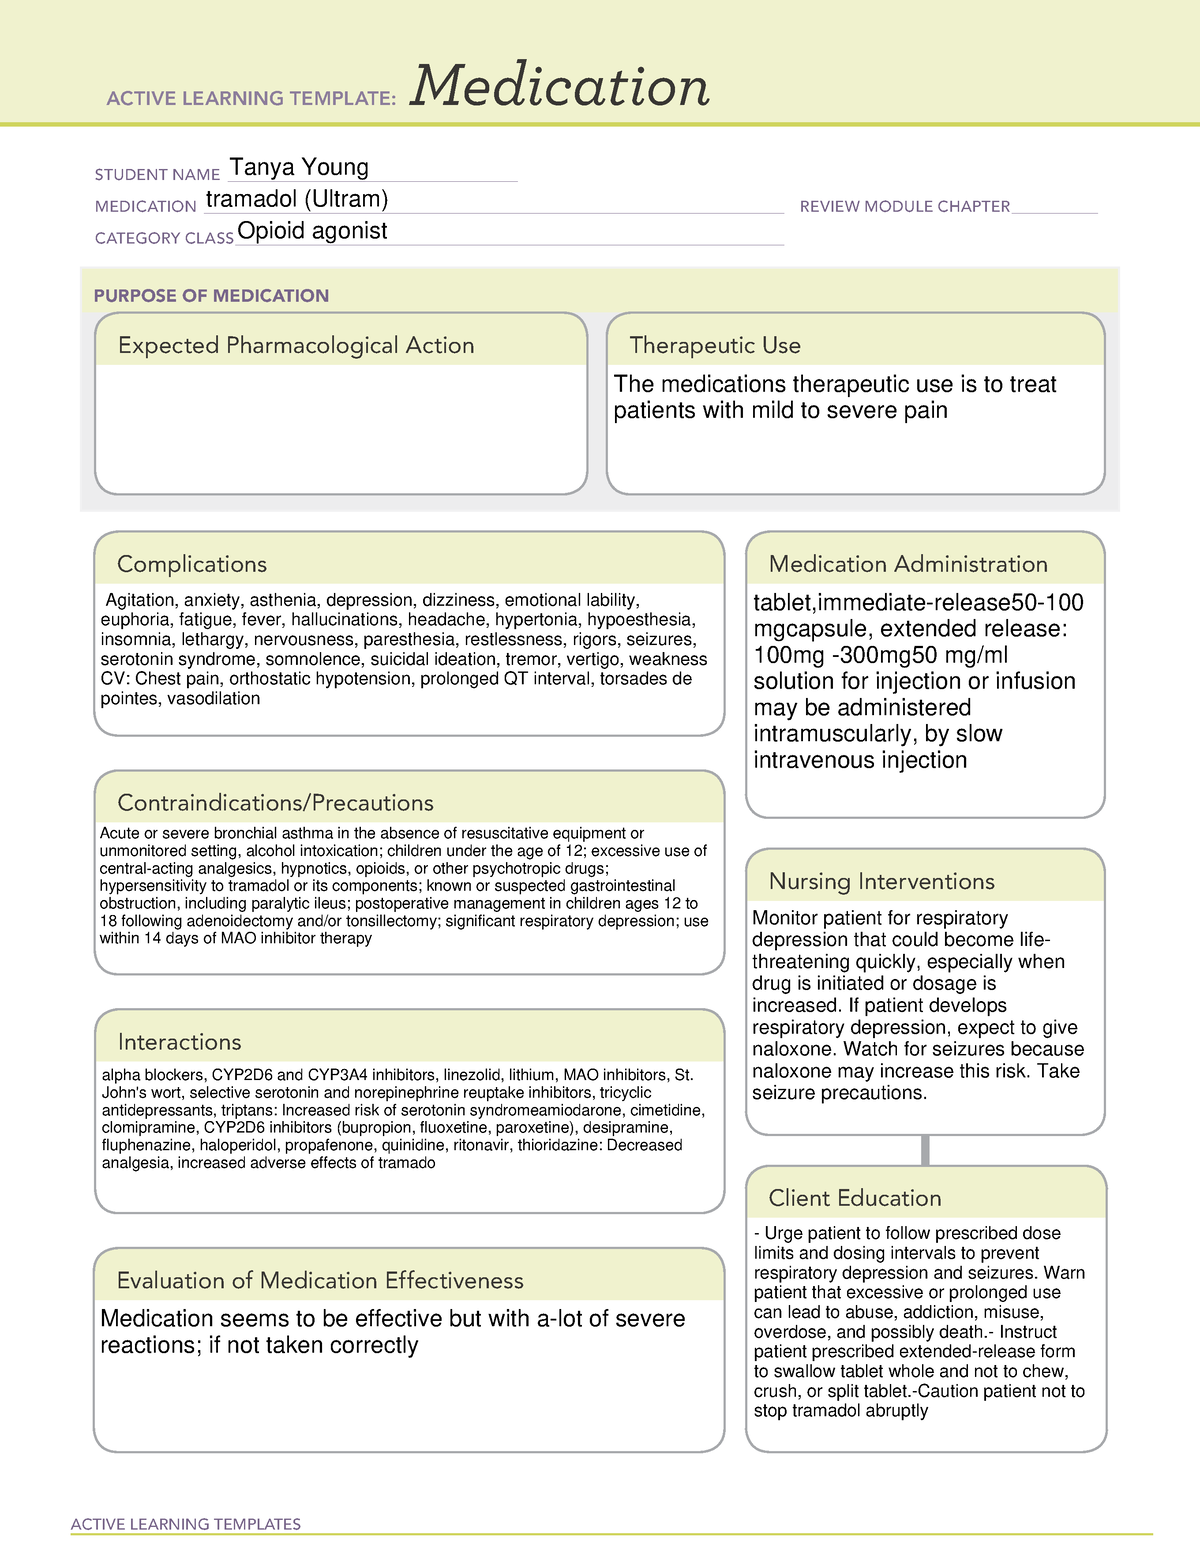 tramadol-ultram-ati-medication-template-active-learning-templates